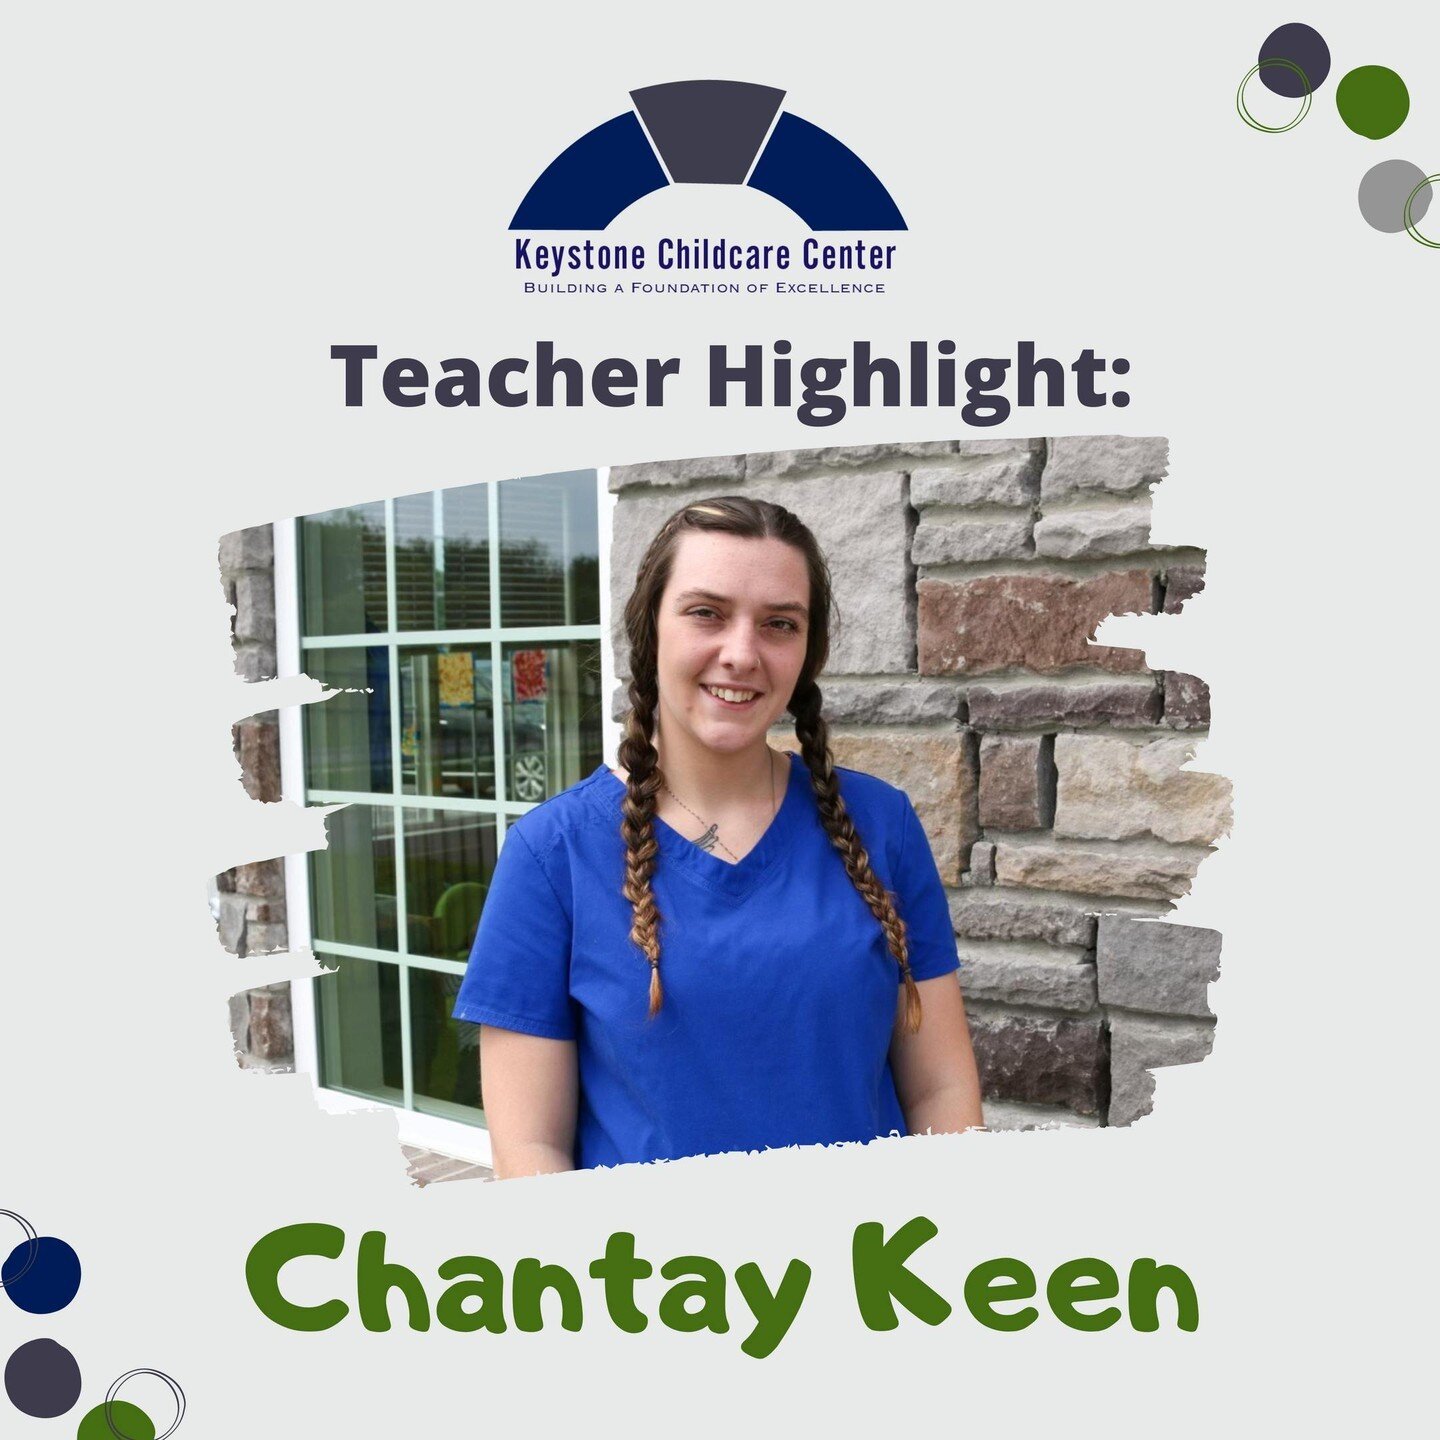 Meet Chantay Keen, our Toddler 1 Co-Lead Educator. 🐛⁠
⁠
She was born and raised in TN and has been an educator for almost five years. ⁠
⁠
Chantay has an almost three-year-old son with an additional son on the way, due in September. ⁠
⁠
Her favorite 